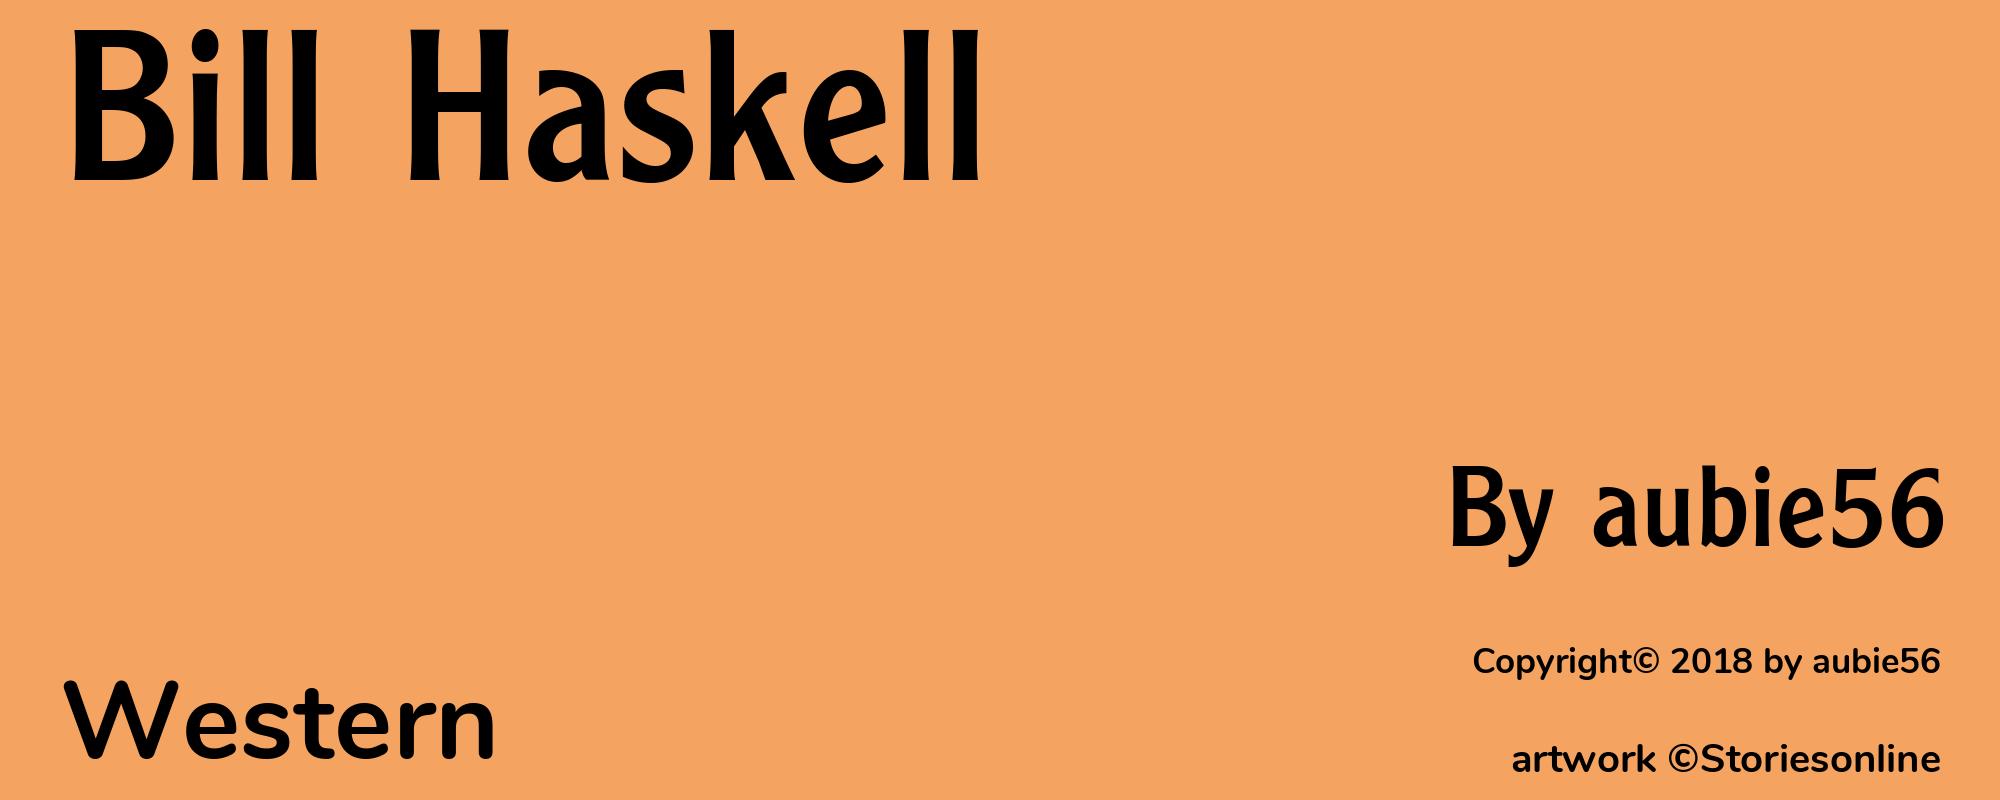 Bill Haskell - Cover